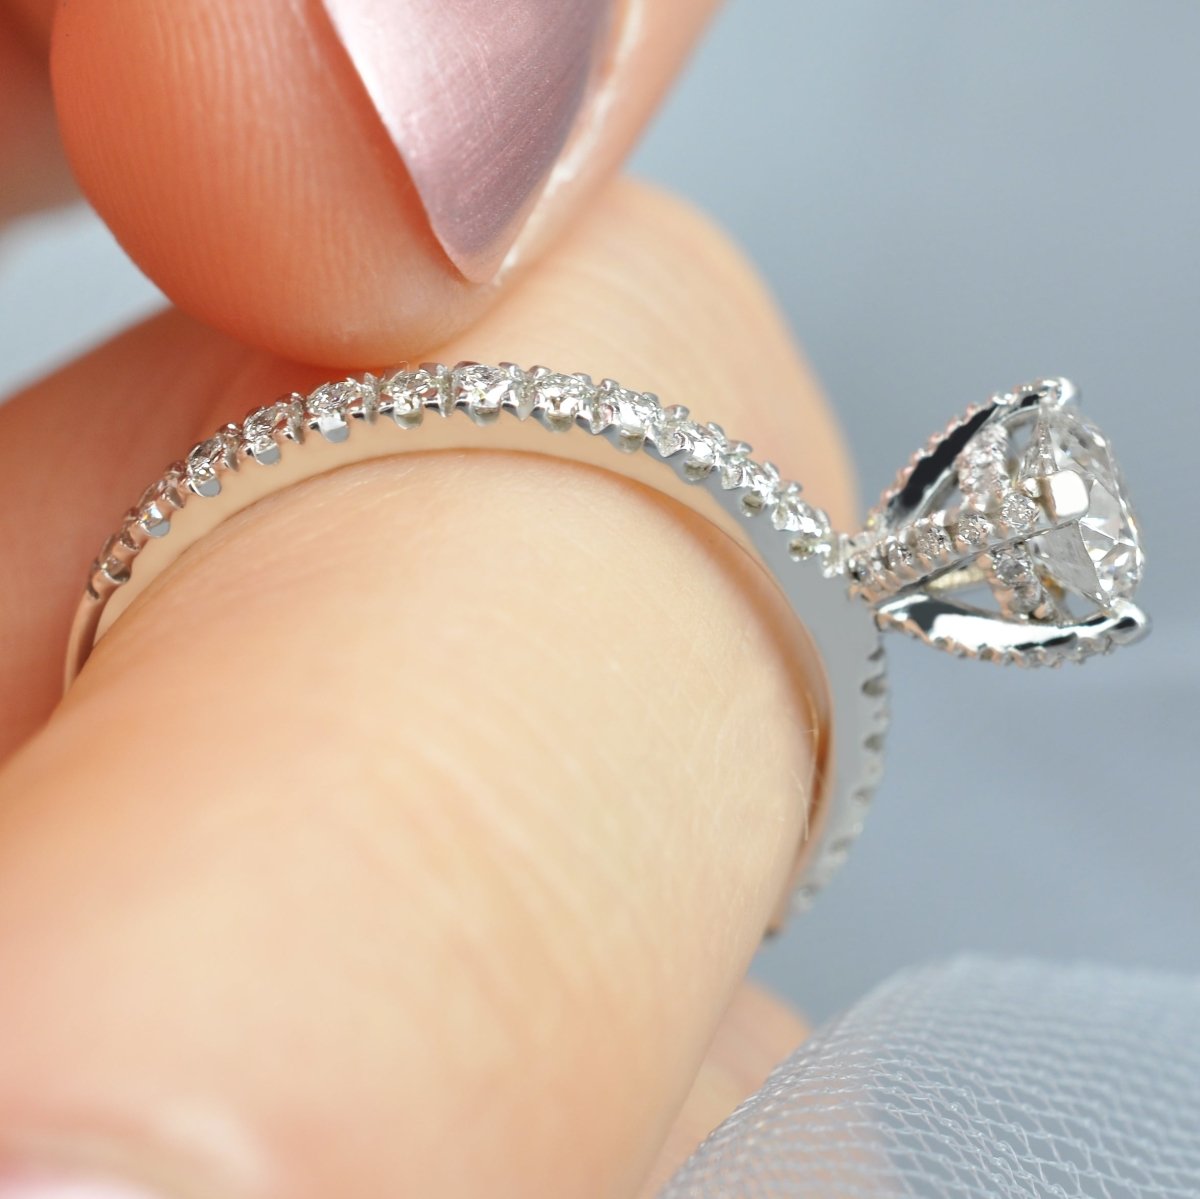 Risk-free 1.20CT Round Cut Diamond Engagement Ring in 14kt White Gold - Primestyle.com